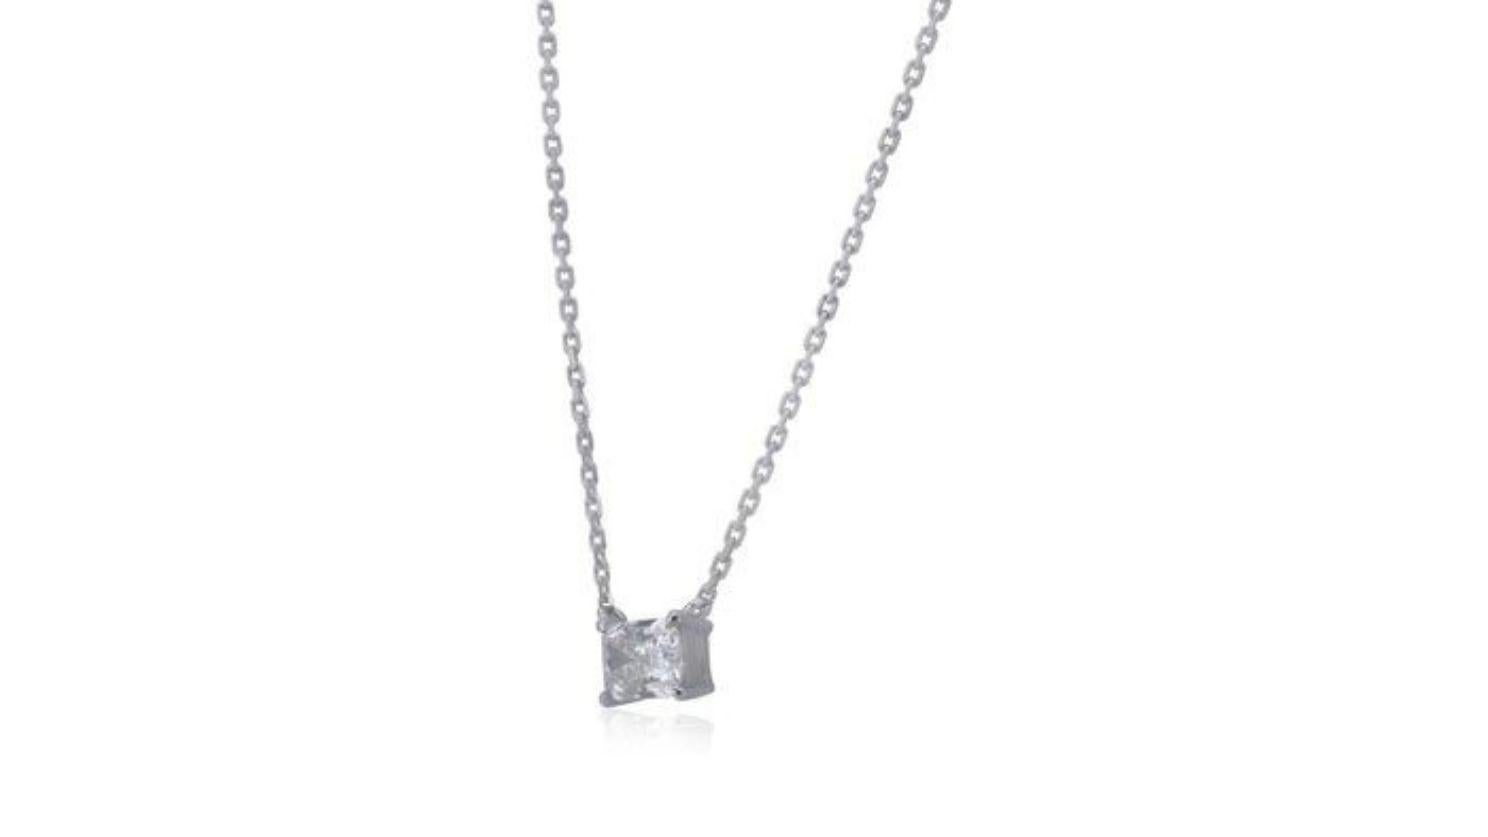 Own a piece of exquisite craftsmanship and captivating brilliance with this stunning necklace, featuring a mesmerizing 0.9 carat radiant-cut diamond. This exceptional stone boasts a near-colorless E color, a near-flawless VS1 clarity, and an